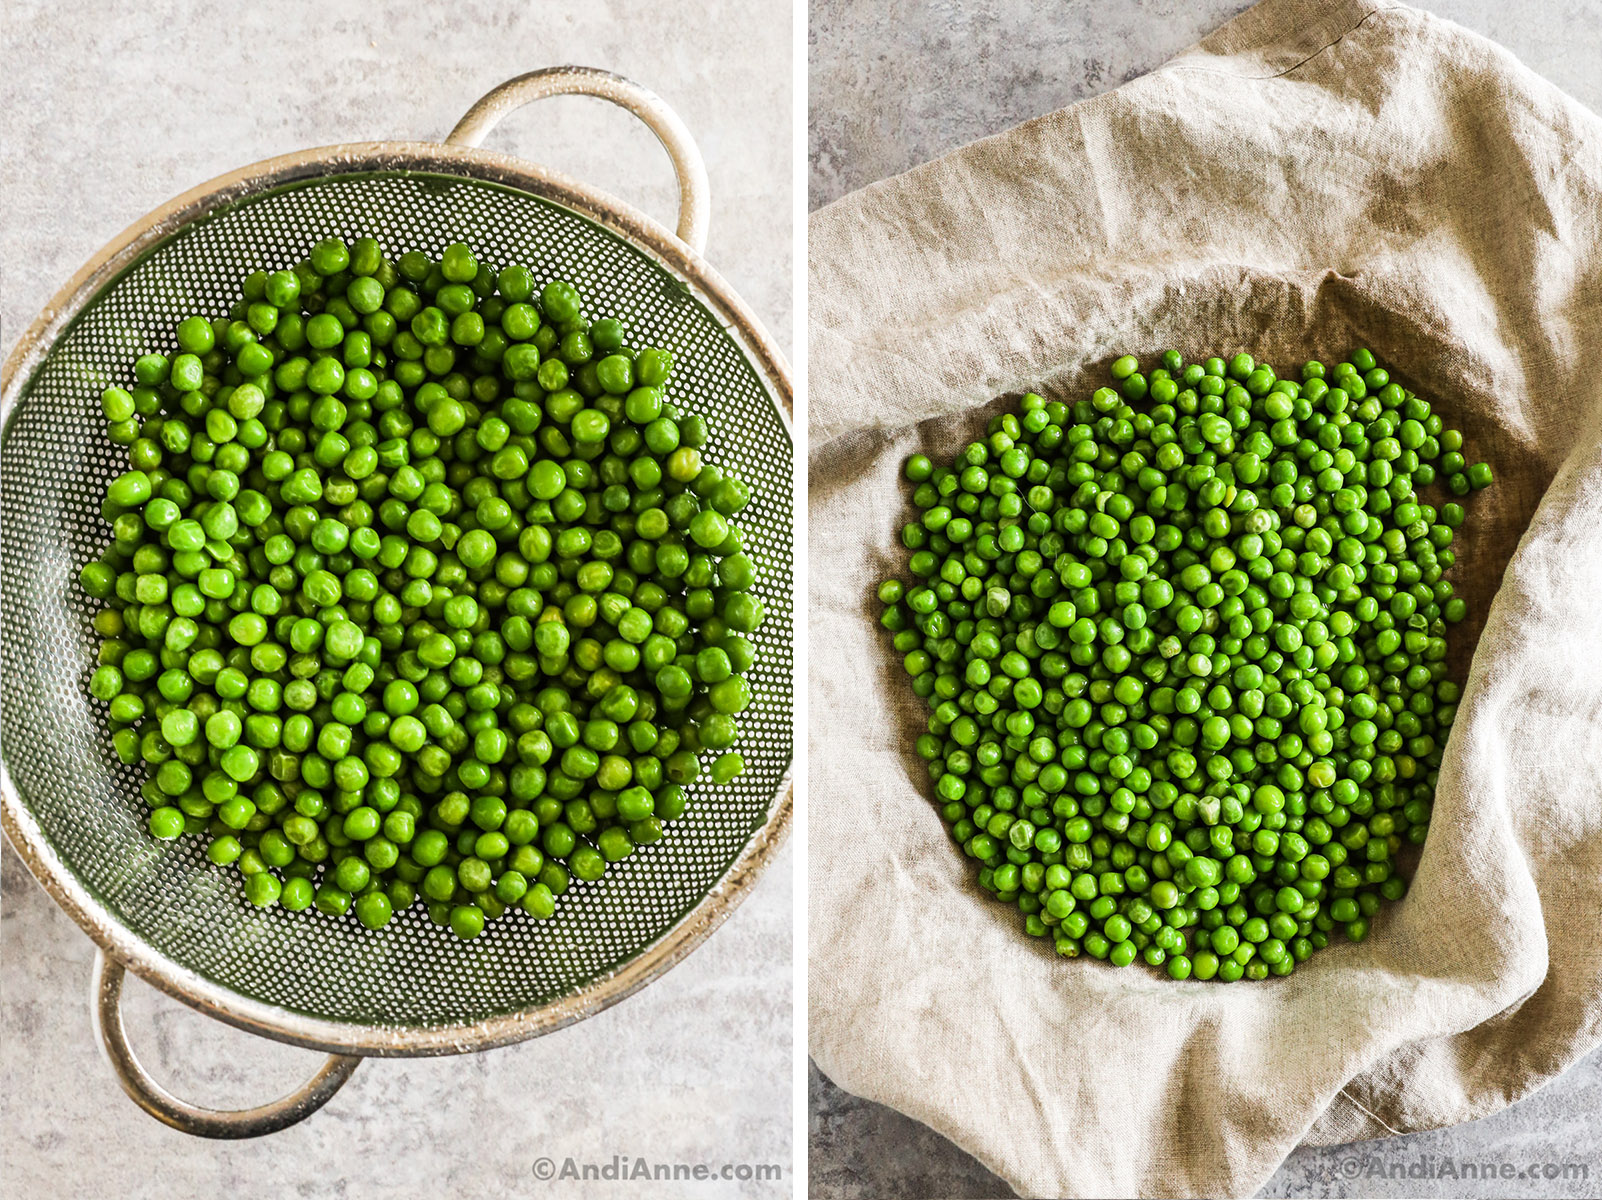 Peas in a strainer and in a kitchen towel.